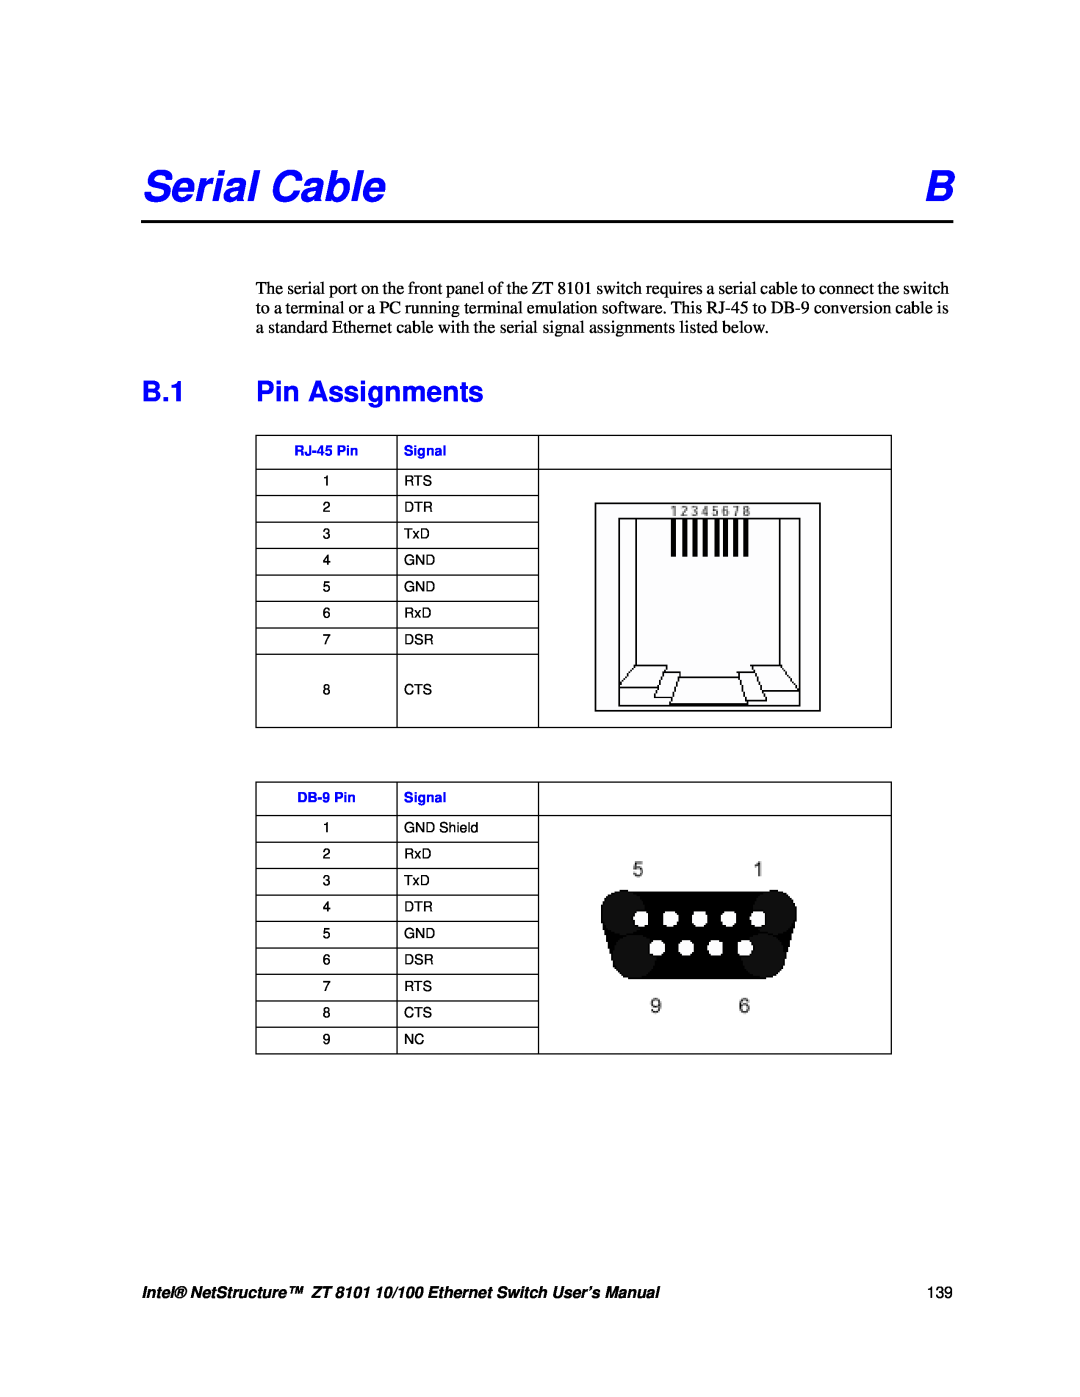 Intel ZT 8101 10/100 user manual Serial Cable, B.1 Pin Assignments 